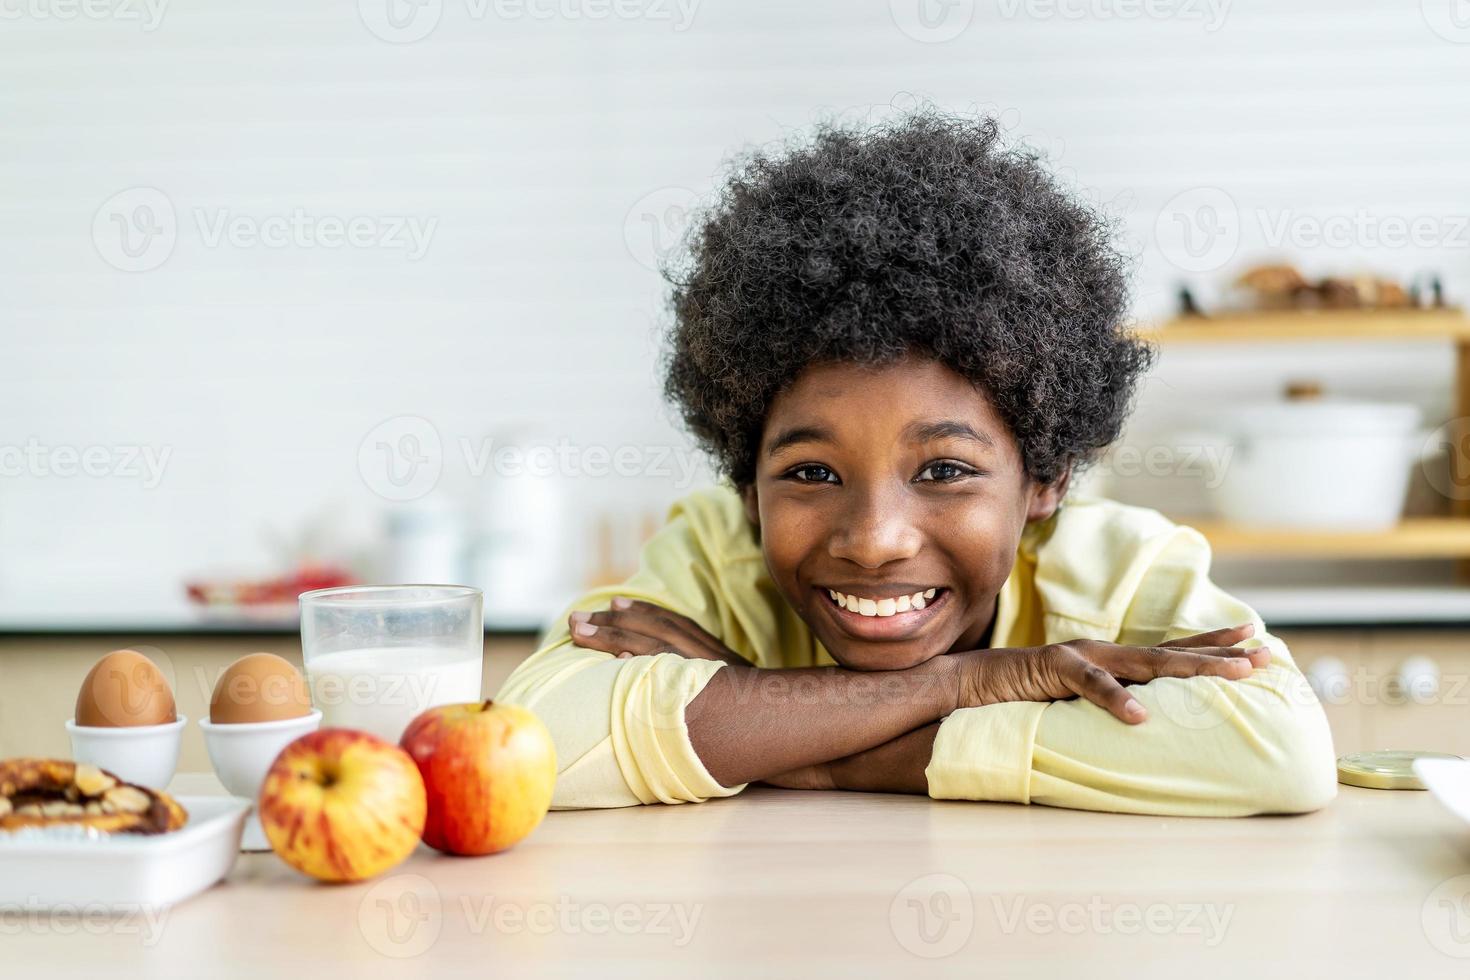 Close up smiling little boy drink glass of milk, sitting at wooden table in kitchen, adorable child kid enjoying organic food yogurt, getting vitamins and calcium, children healthcare concept photo